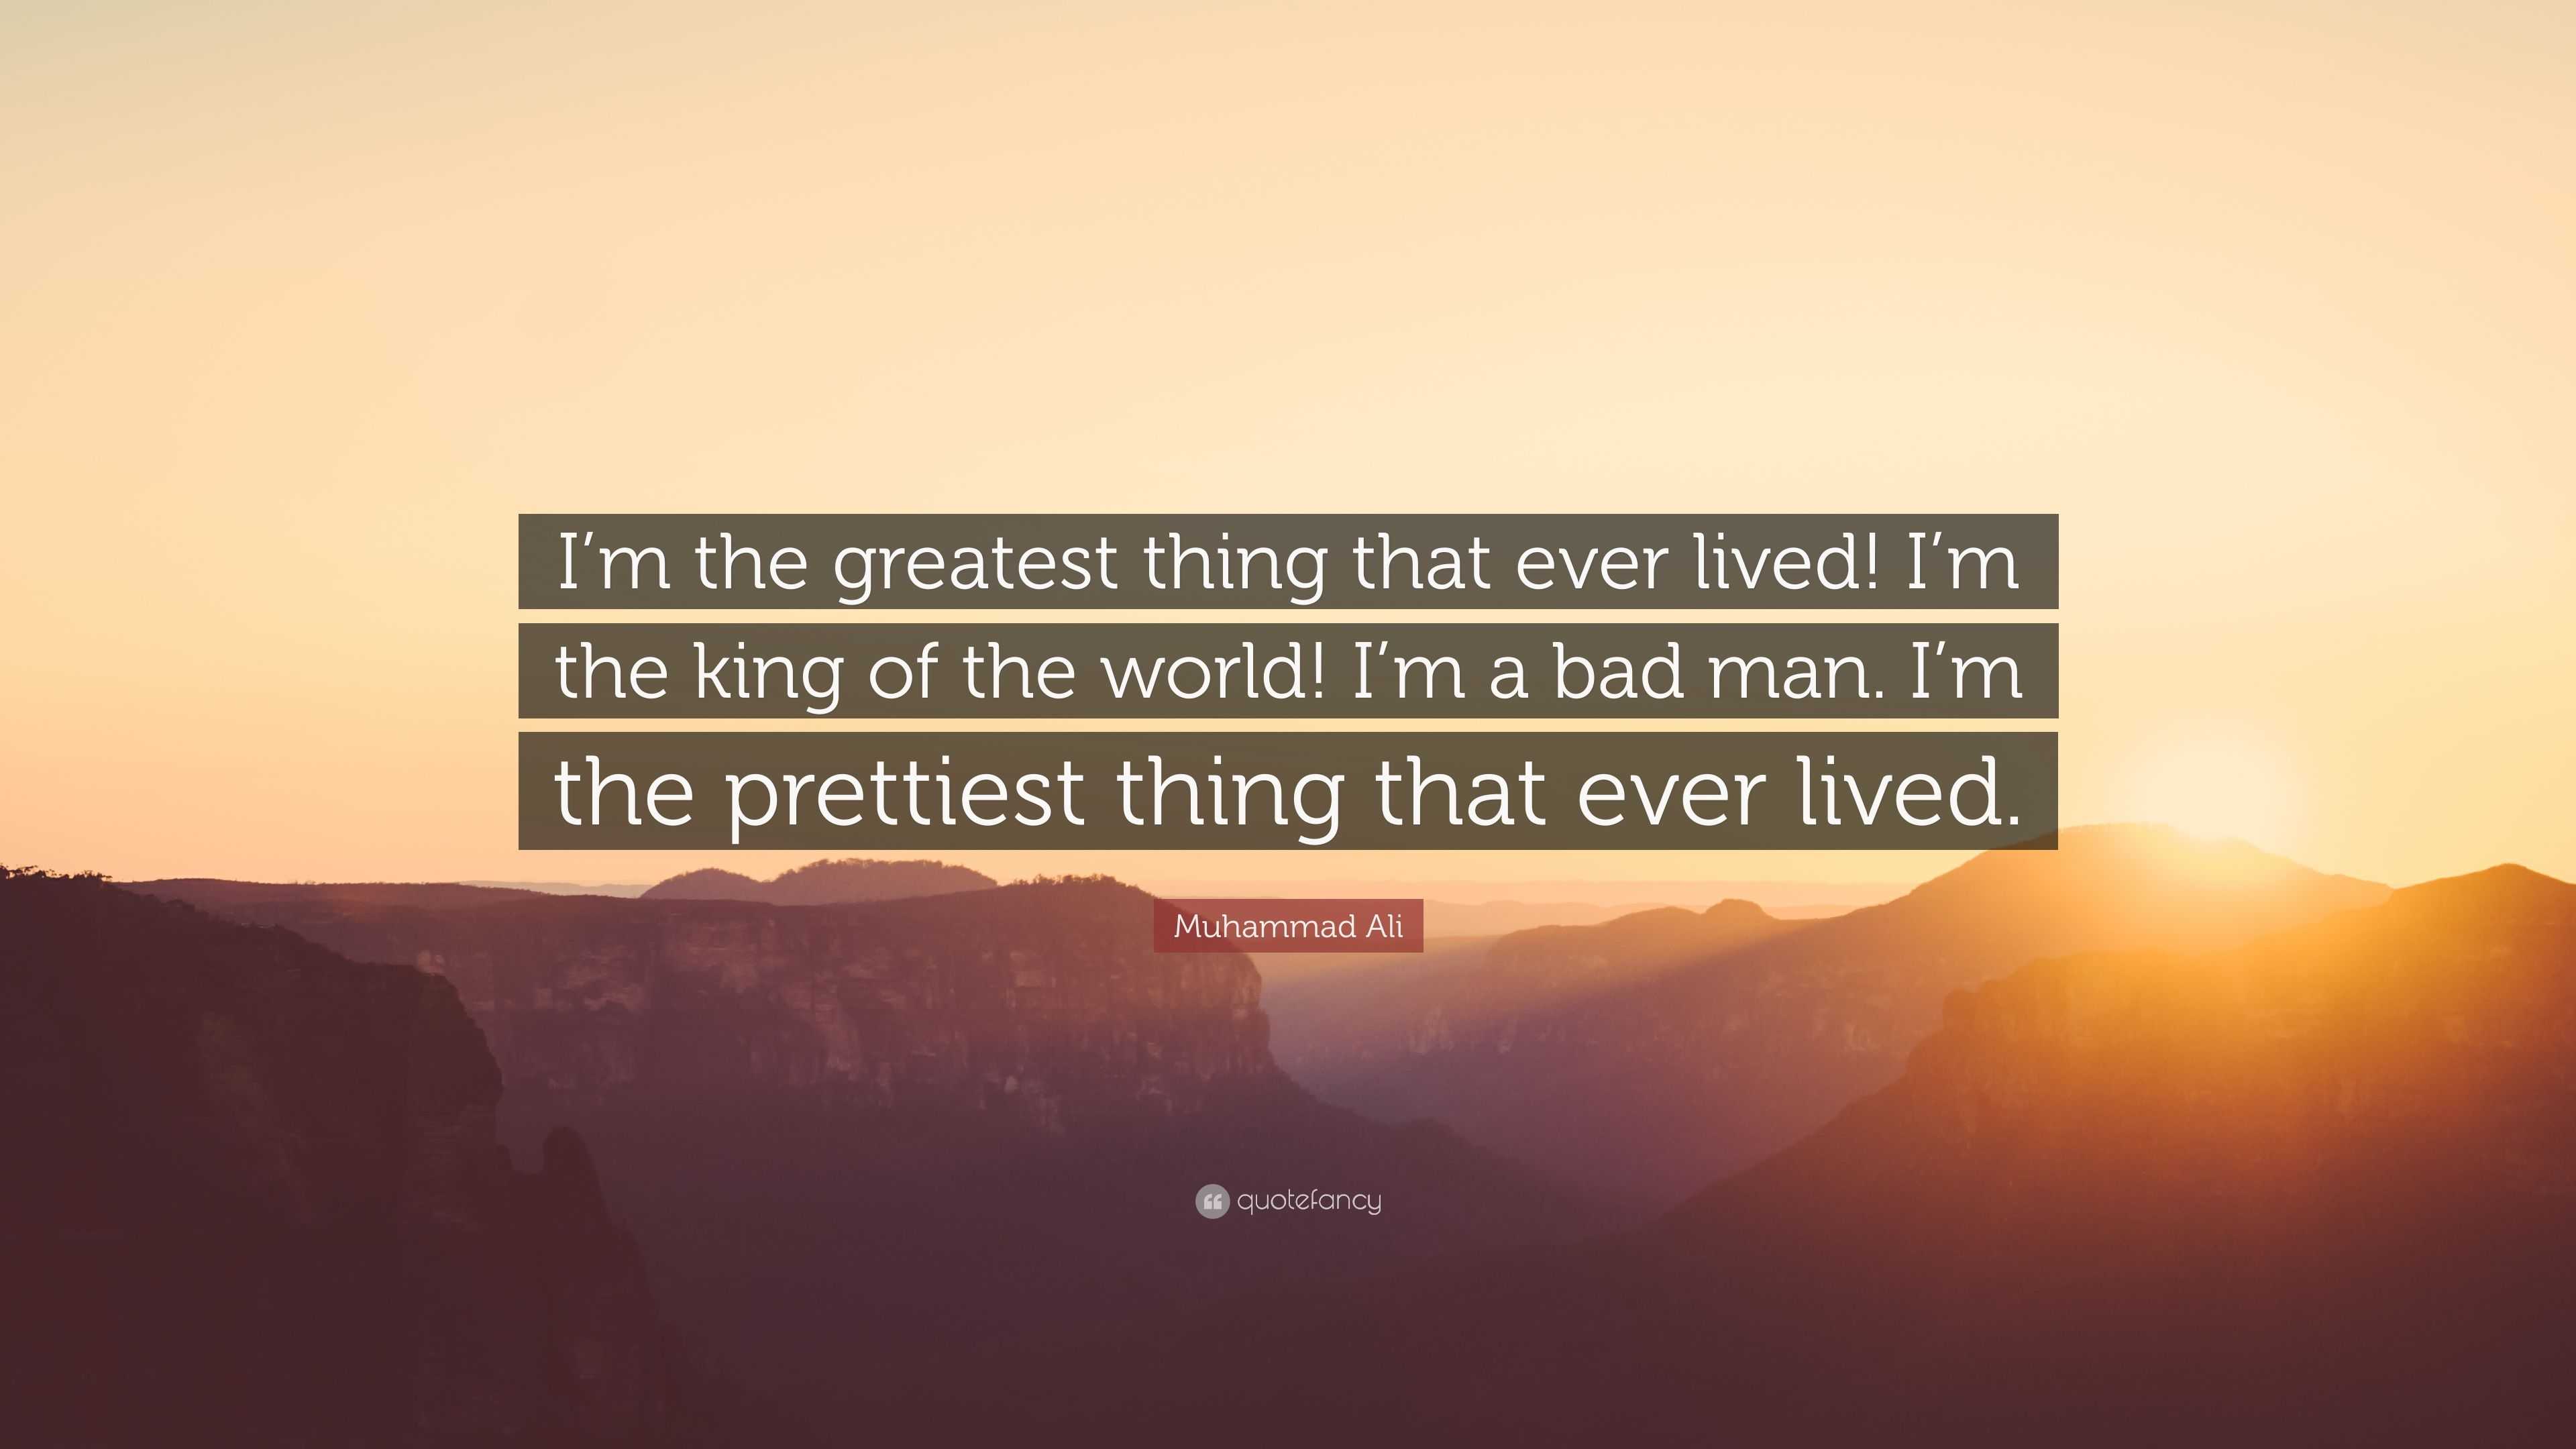 Muhammad Ali Quote: “I'm the greatest thing that ever lived! I'm the king  of the world! I'm a bad man. I'm the prettiest thing that ever live”